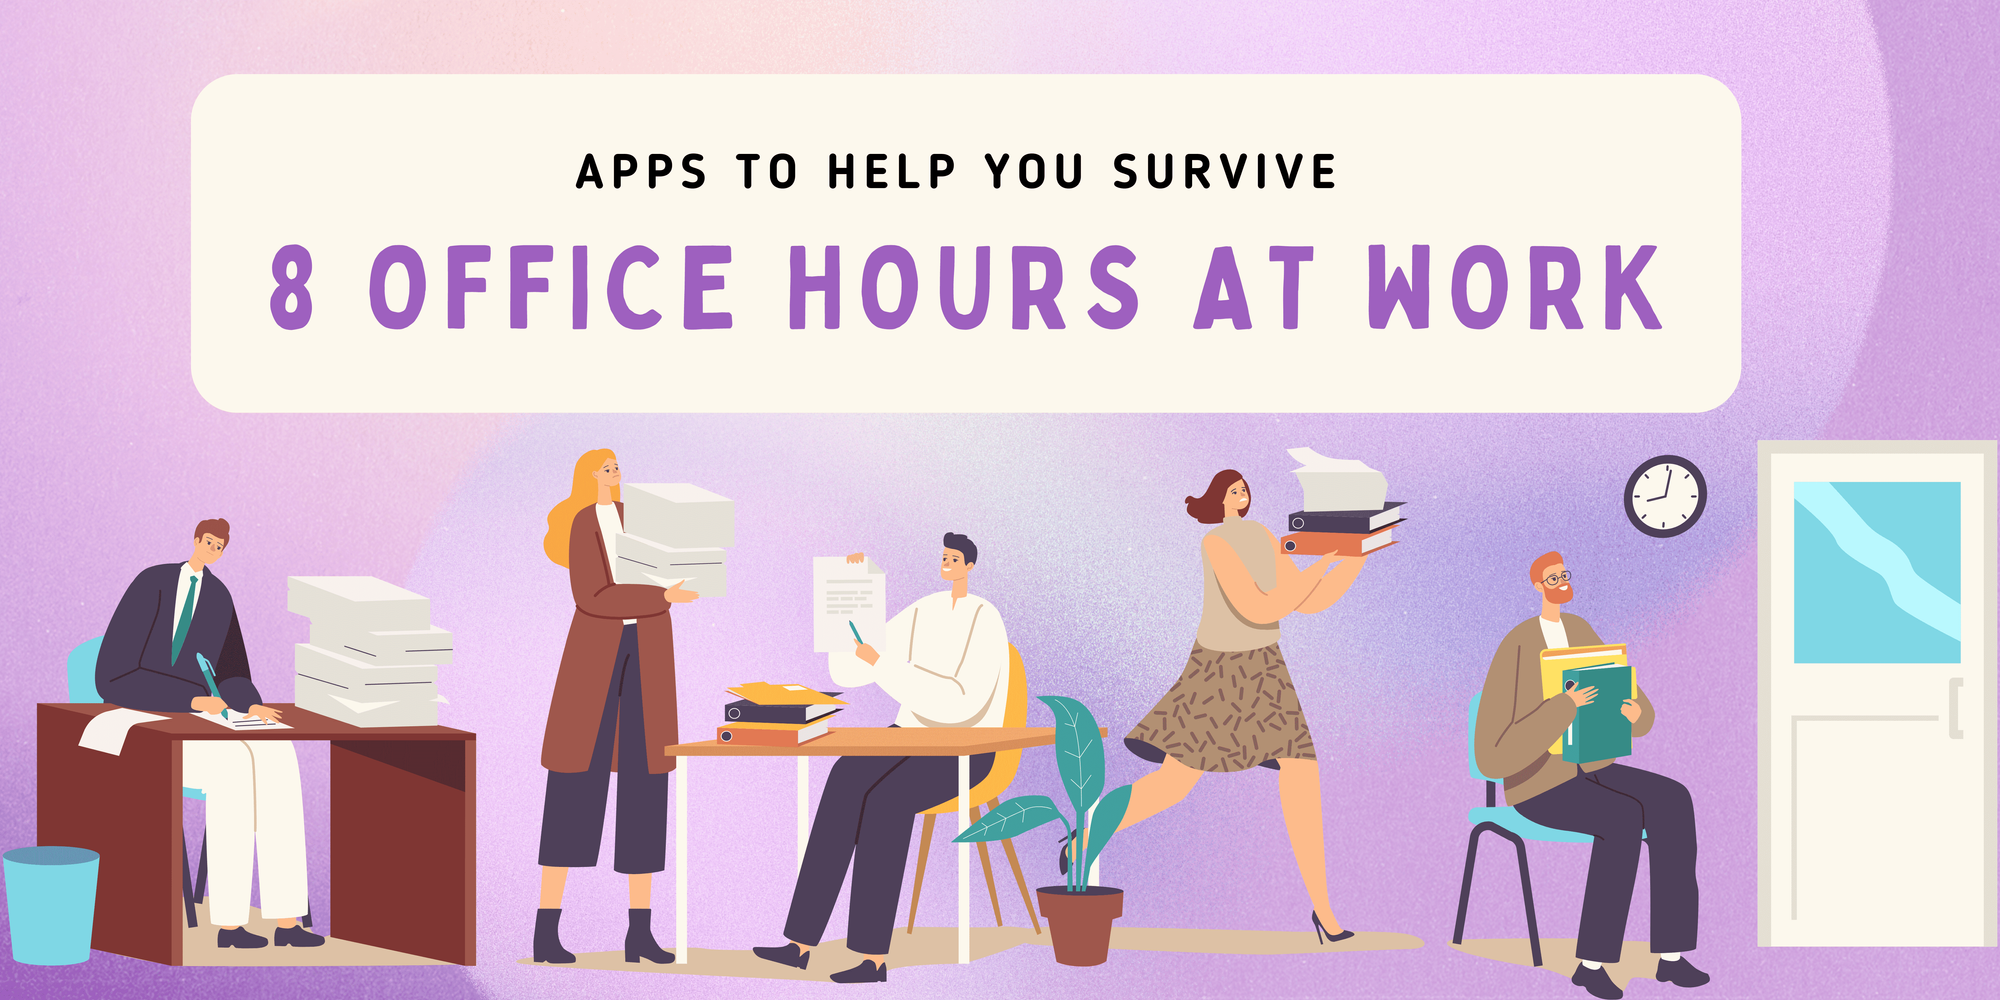 9 apps to help you survive 8 office hours at work